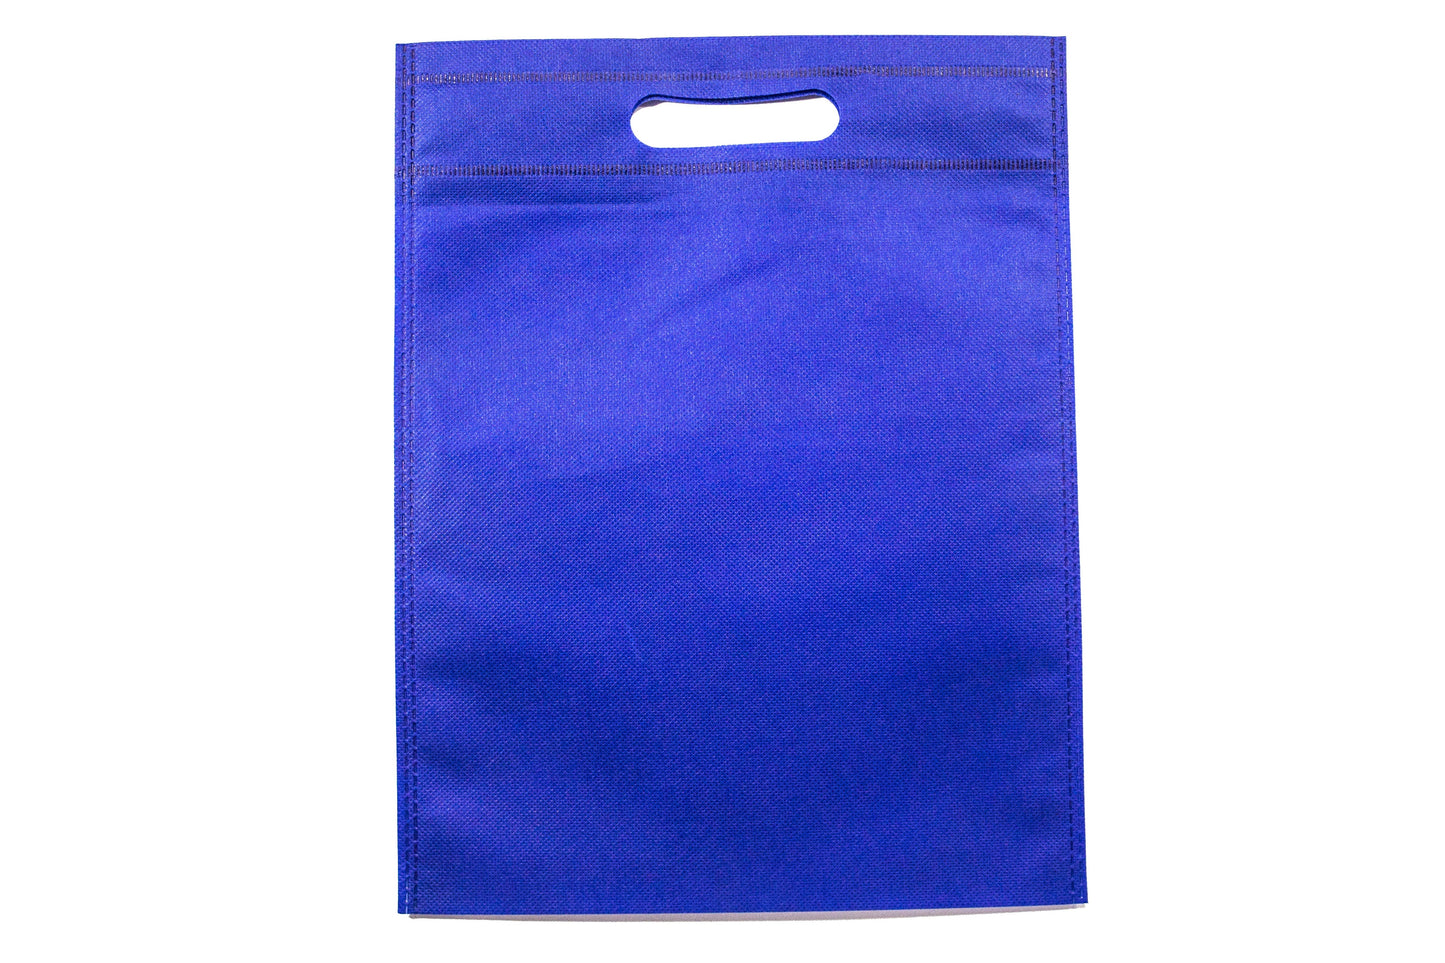 Eco Bag Non Woven Large 14x18in